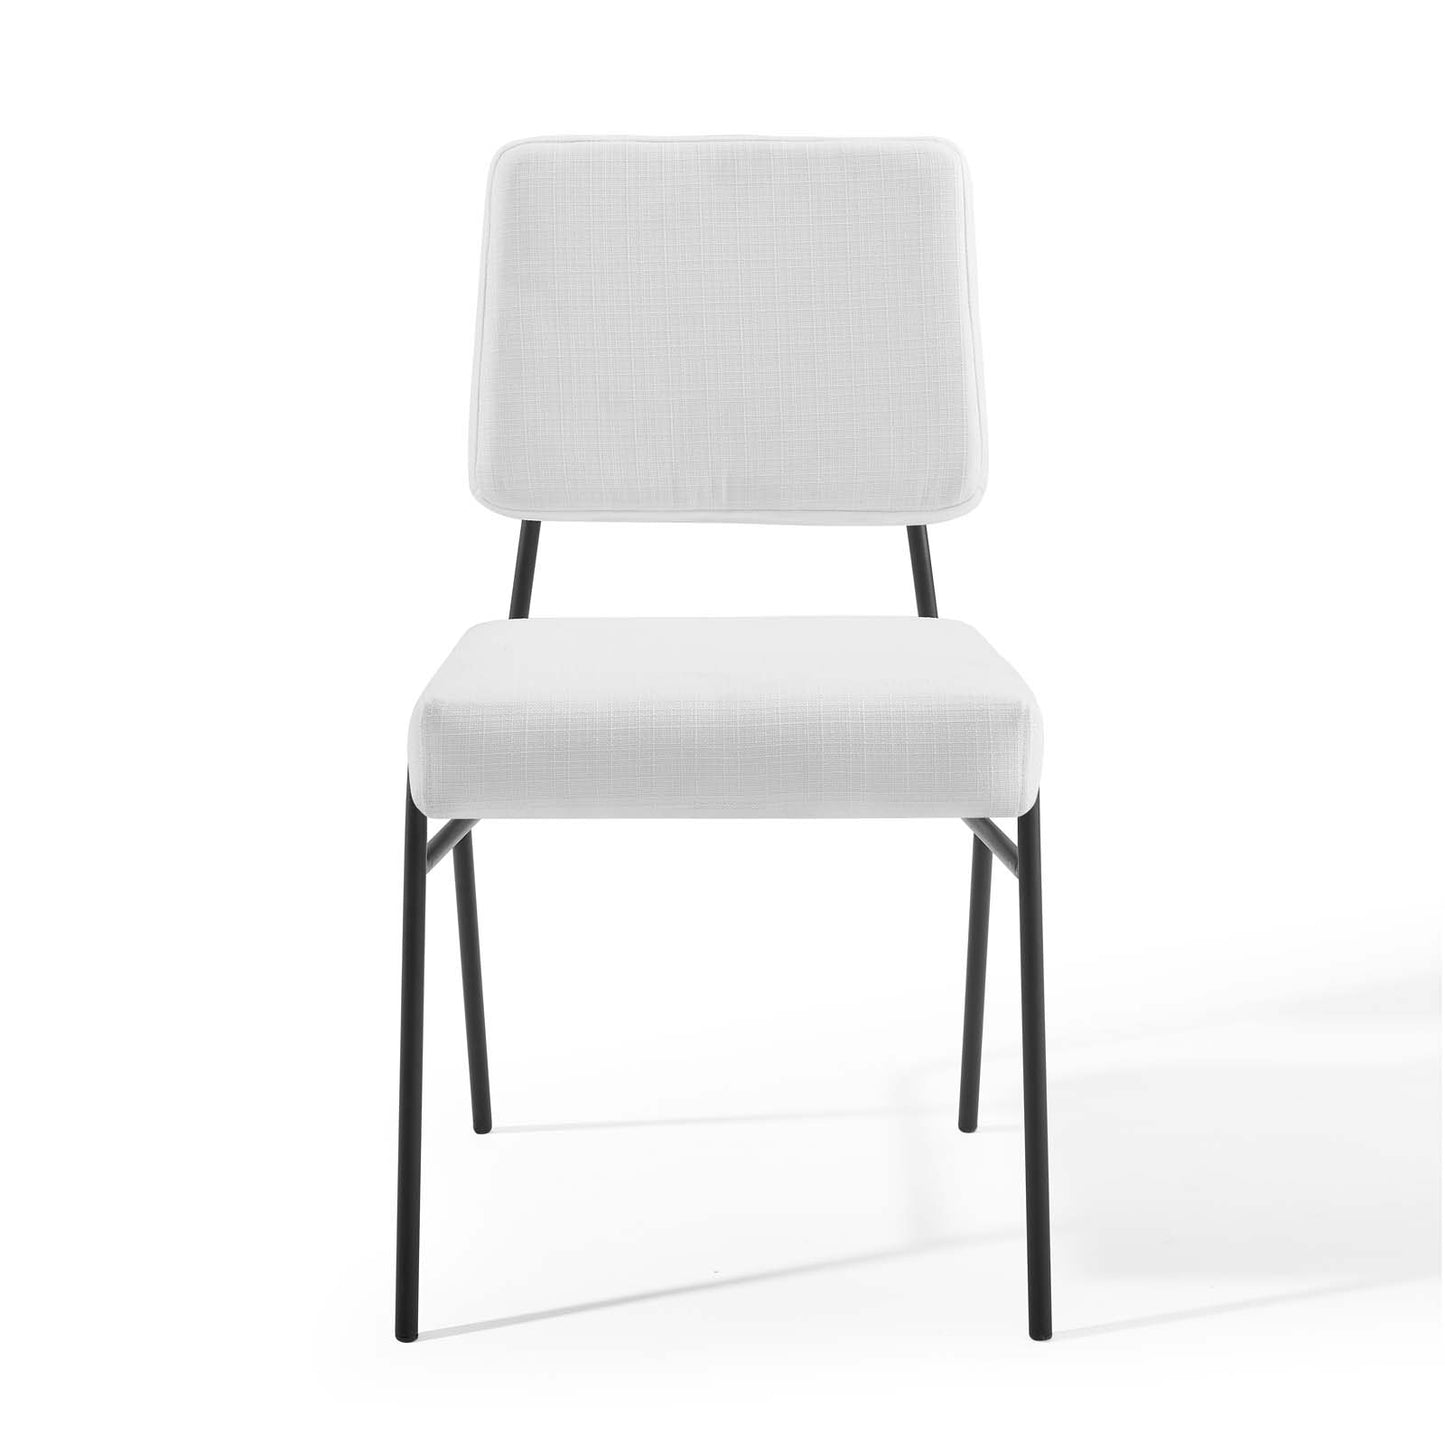 Craft Dining Side Chair Upholstered Fabric Set of 2 Black White EEI-4506-BLK-WHI